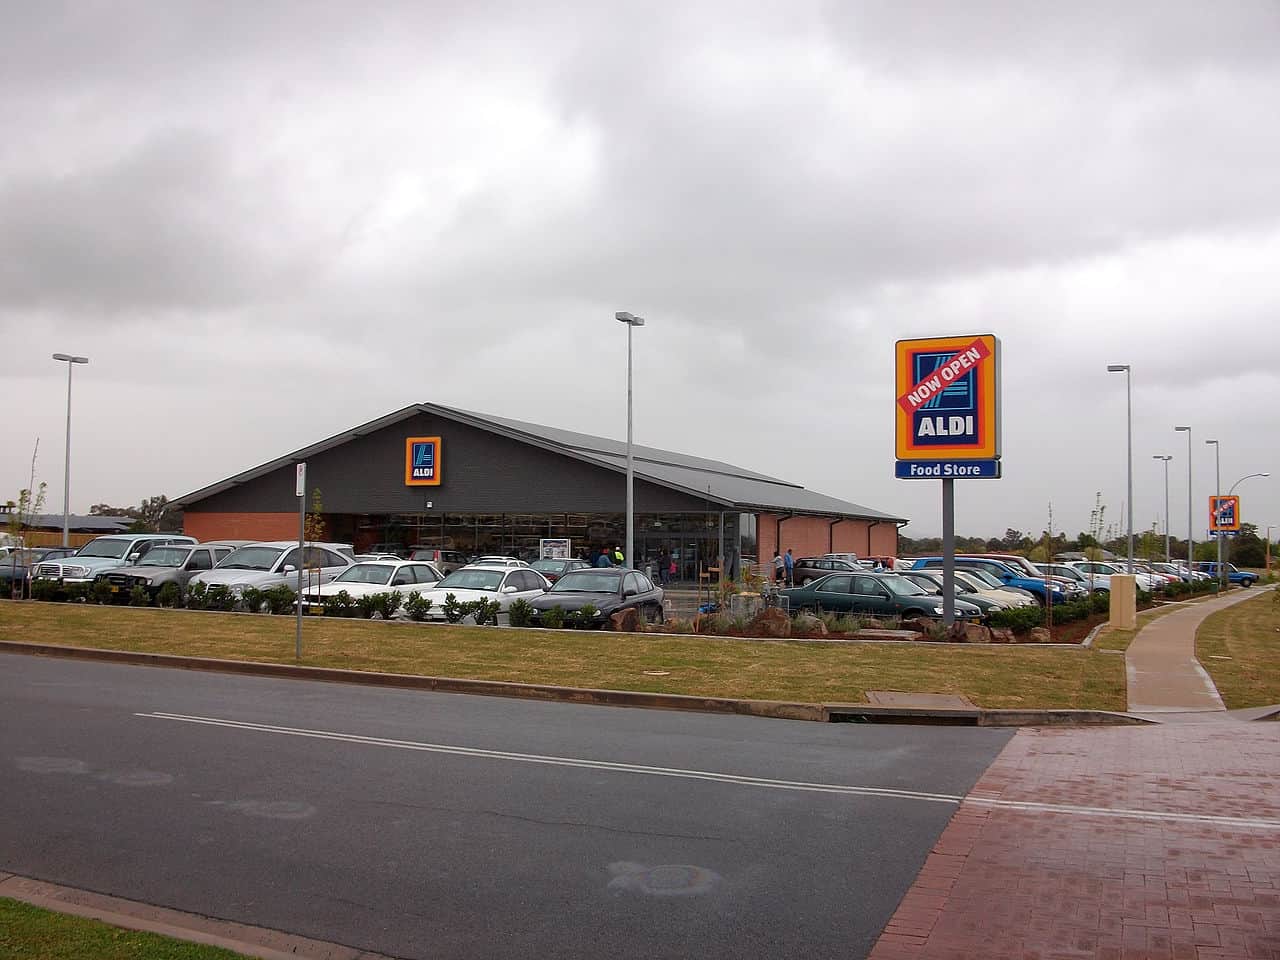 How Much Does Aldi Pay?